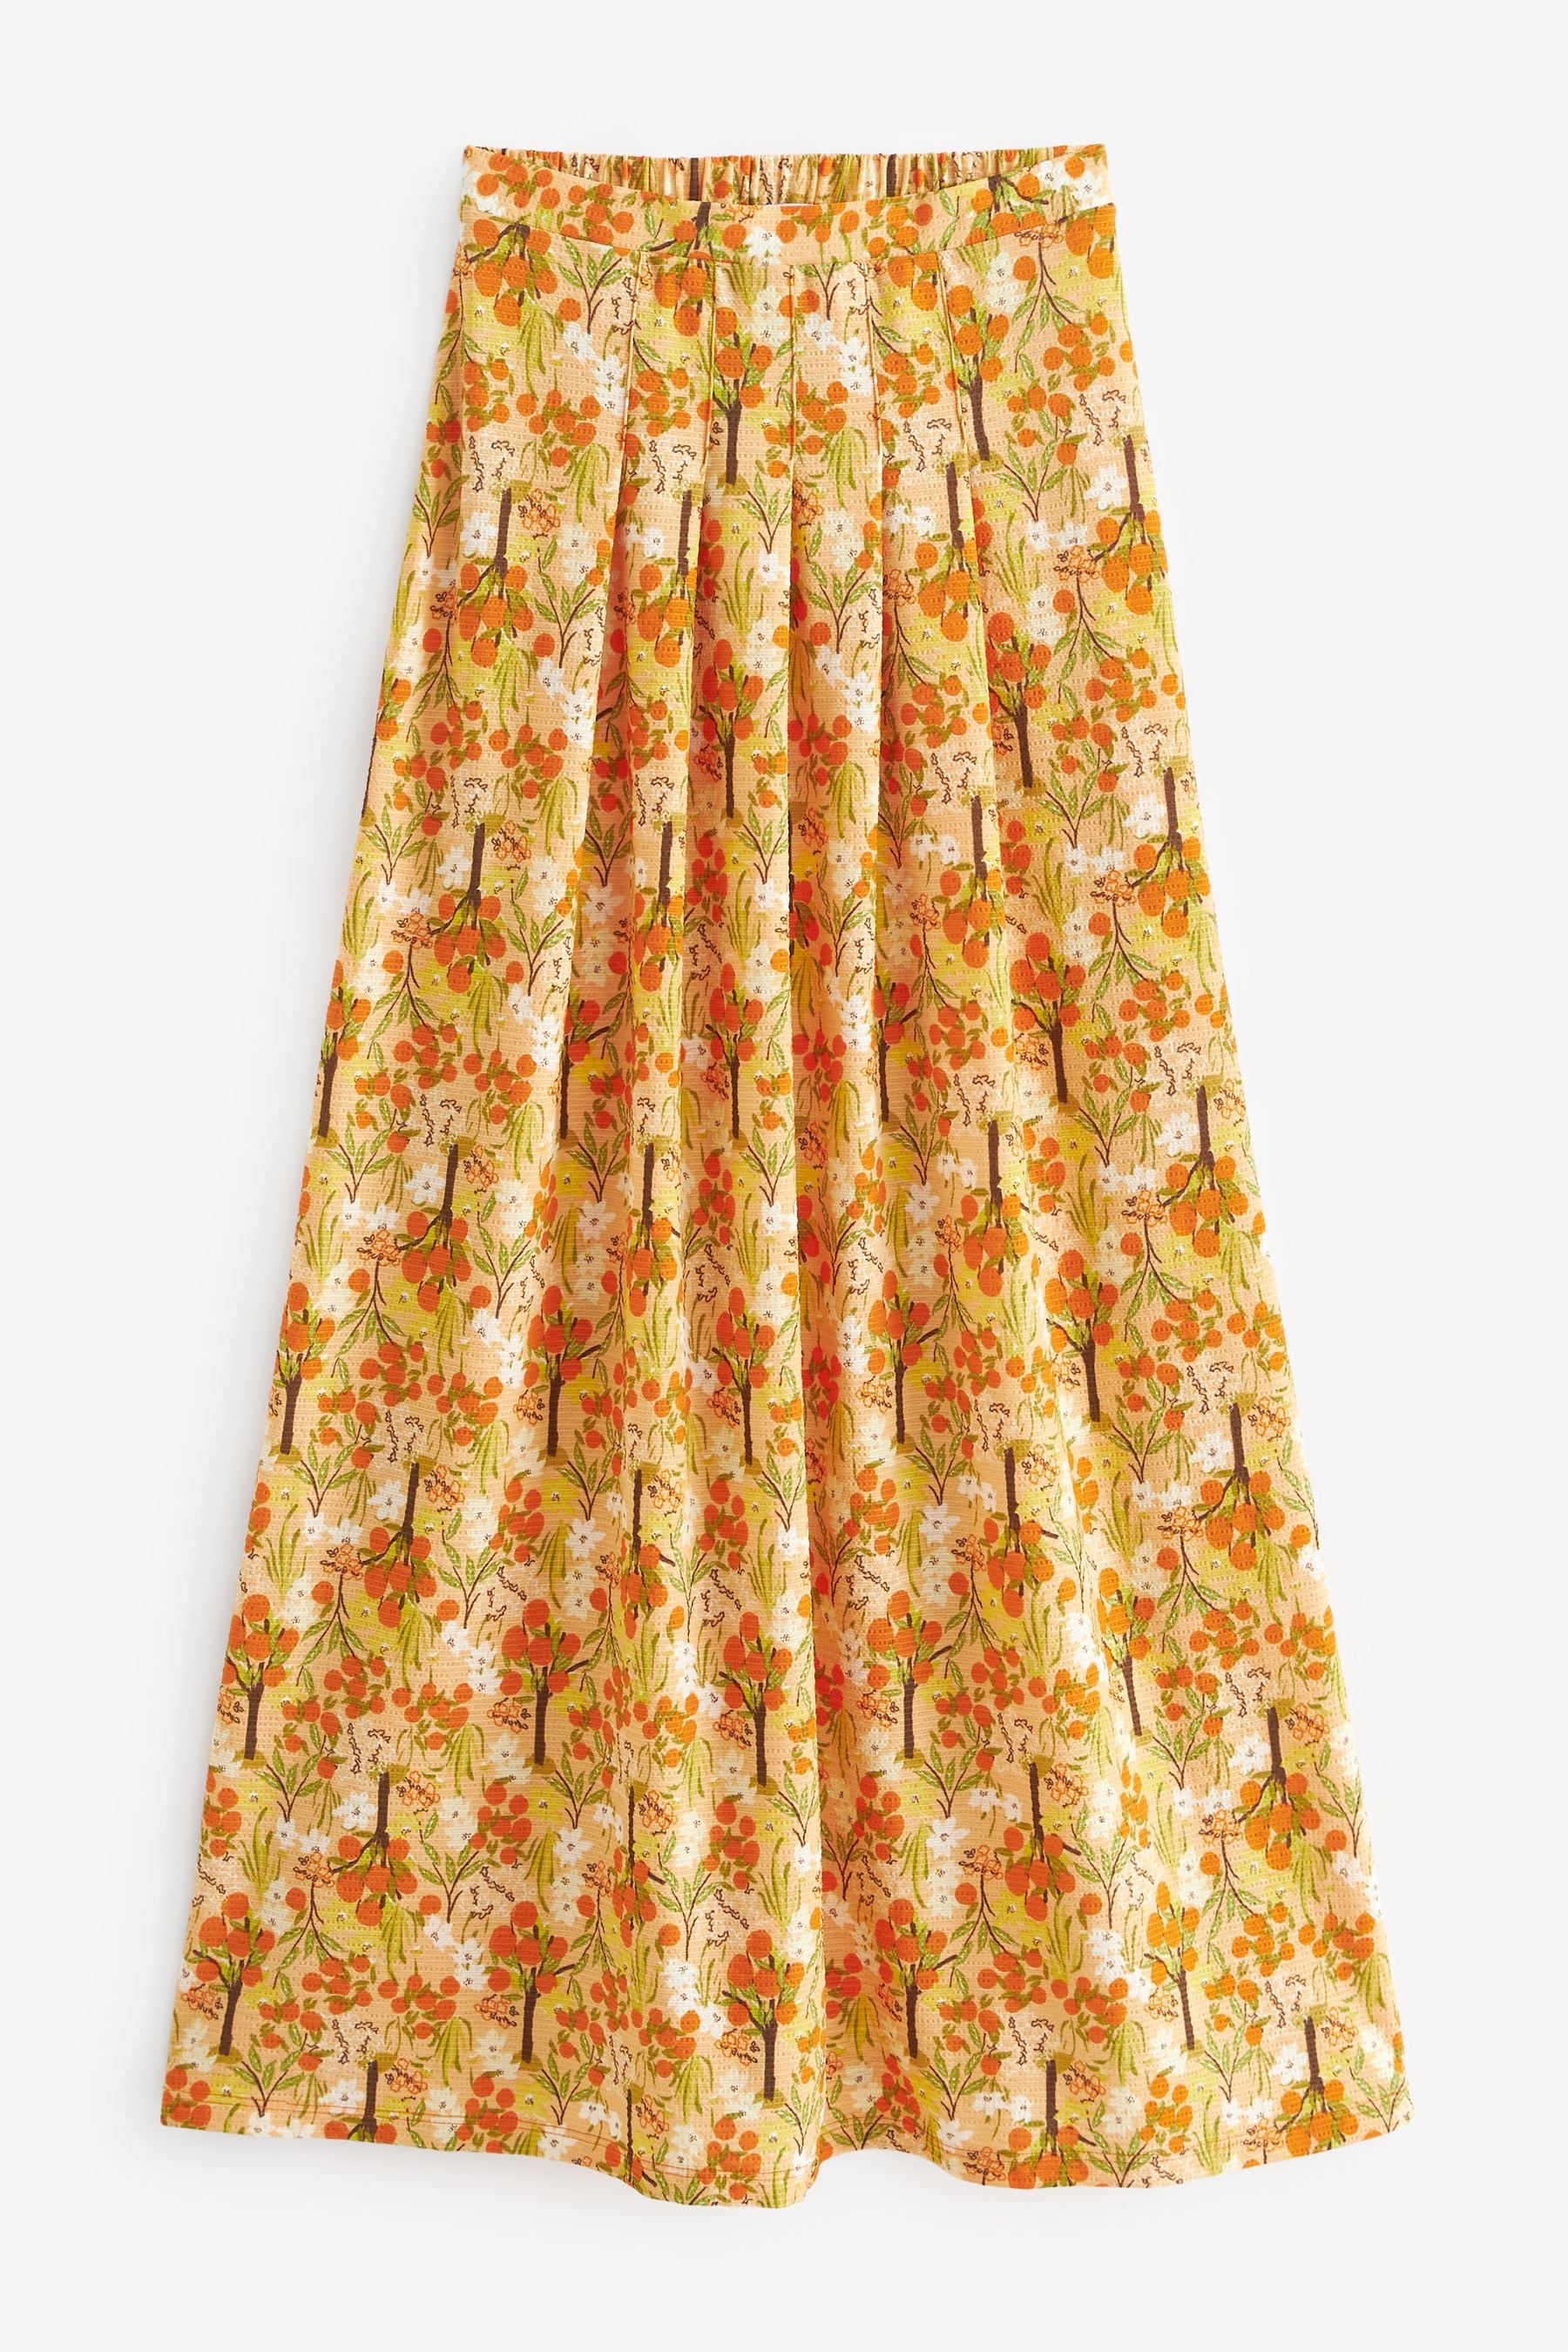 Buy Pleat Front Detail Maxi Skirt from Next Ireland